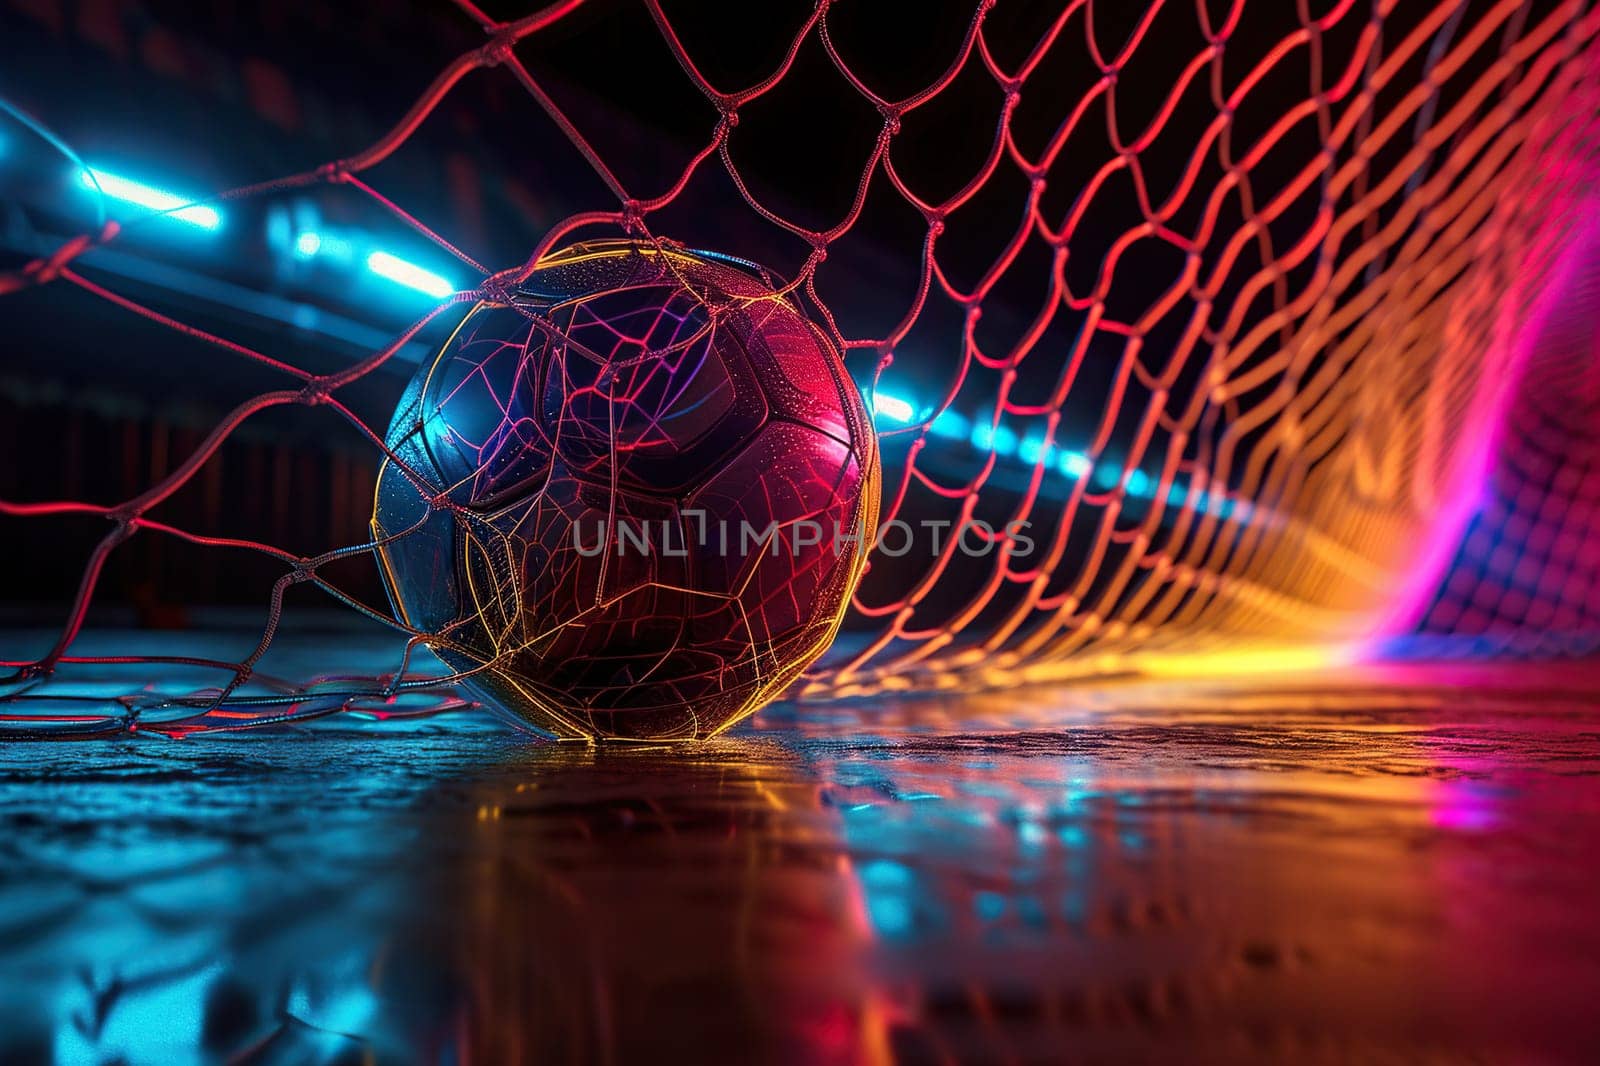 A soccer ball in a goal with a net in a neon glow.